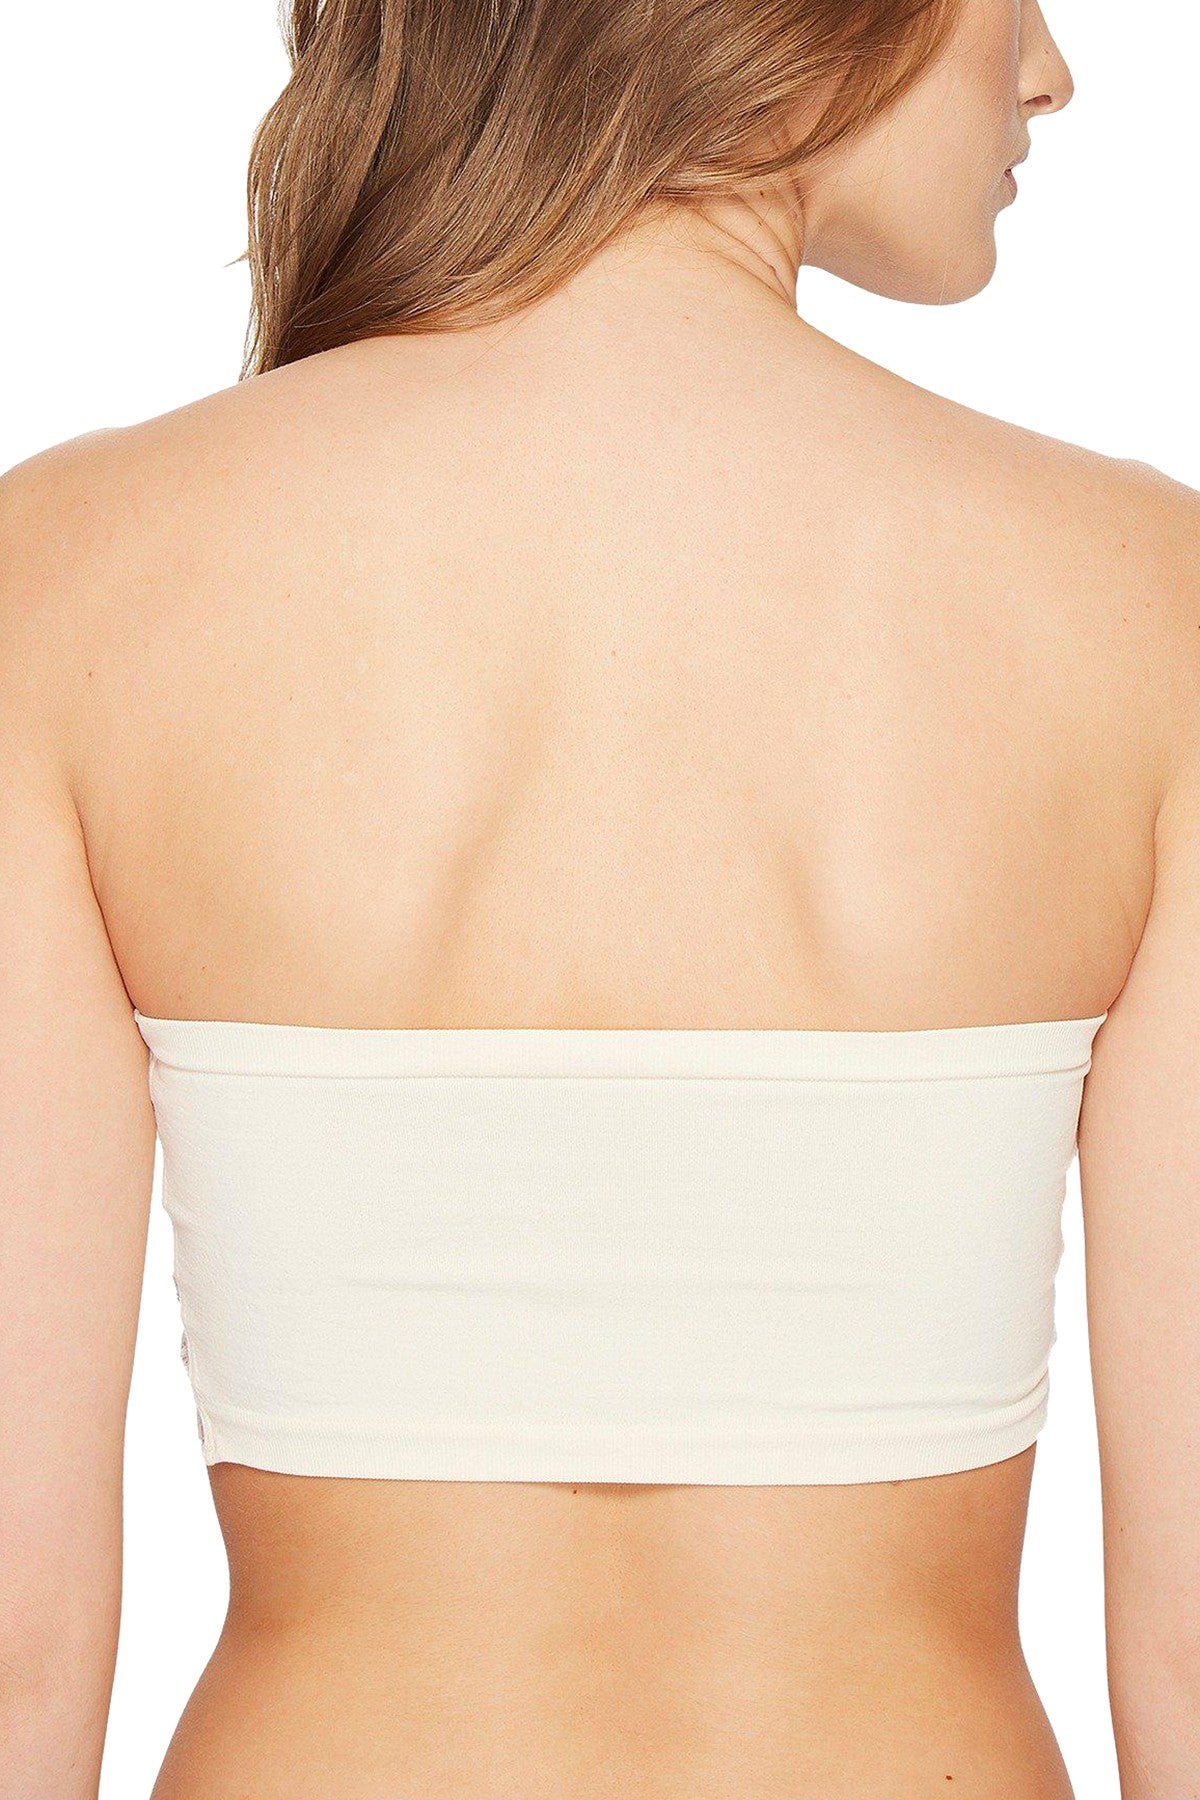 Free People Ivory Reversible Seamless Lace Bandeau Bralette